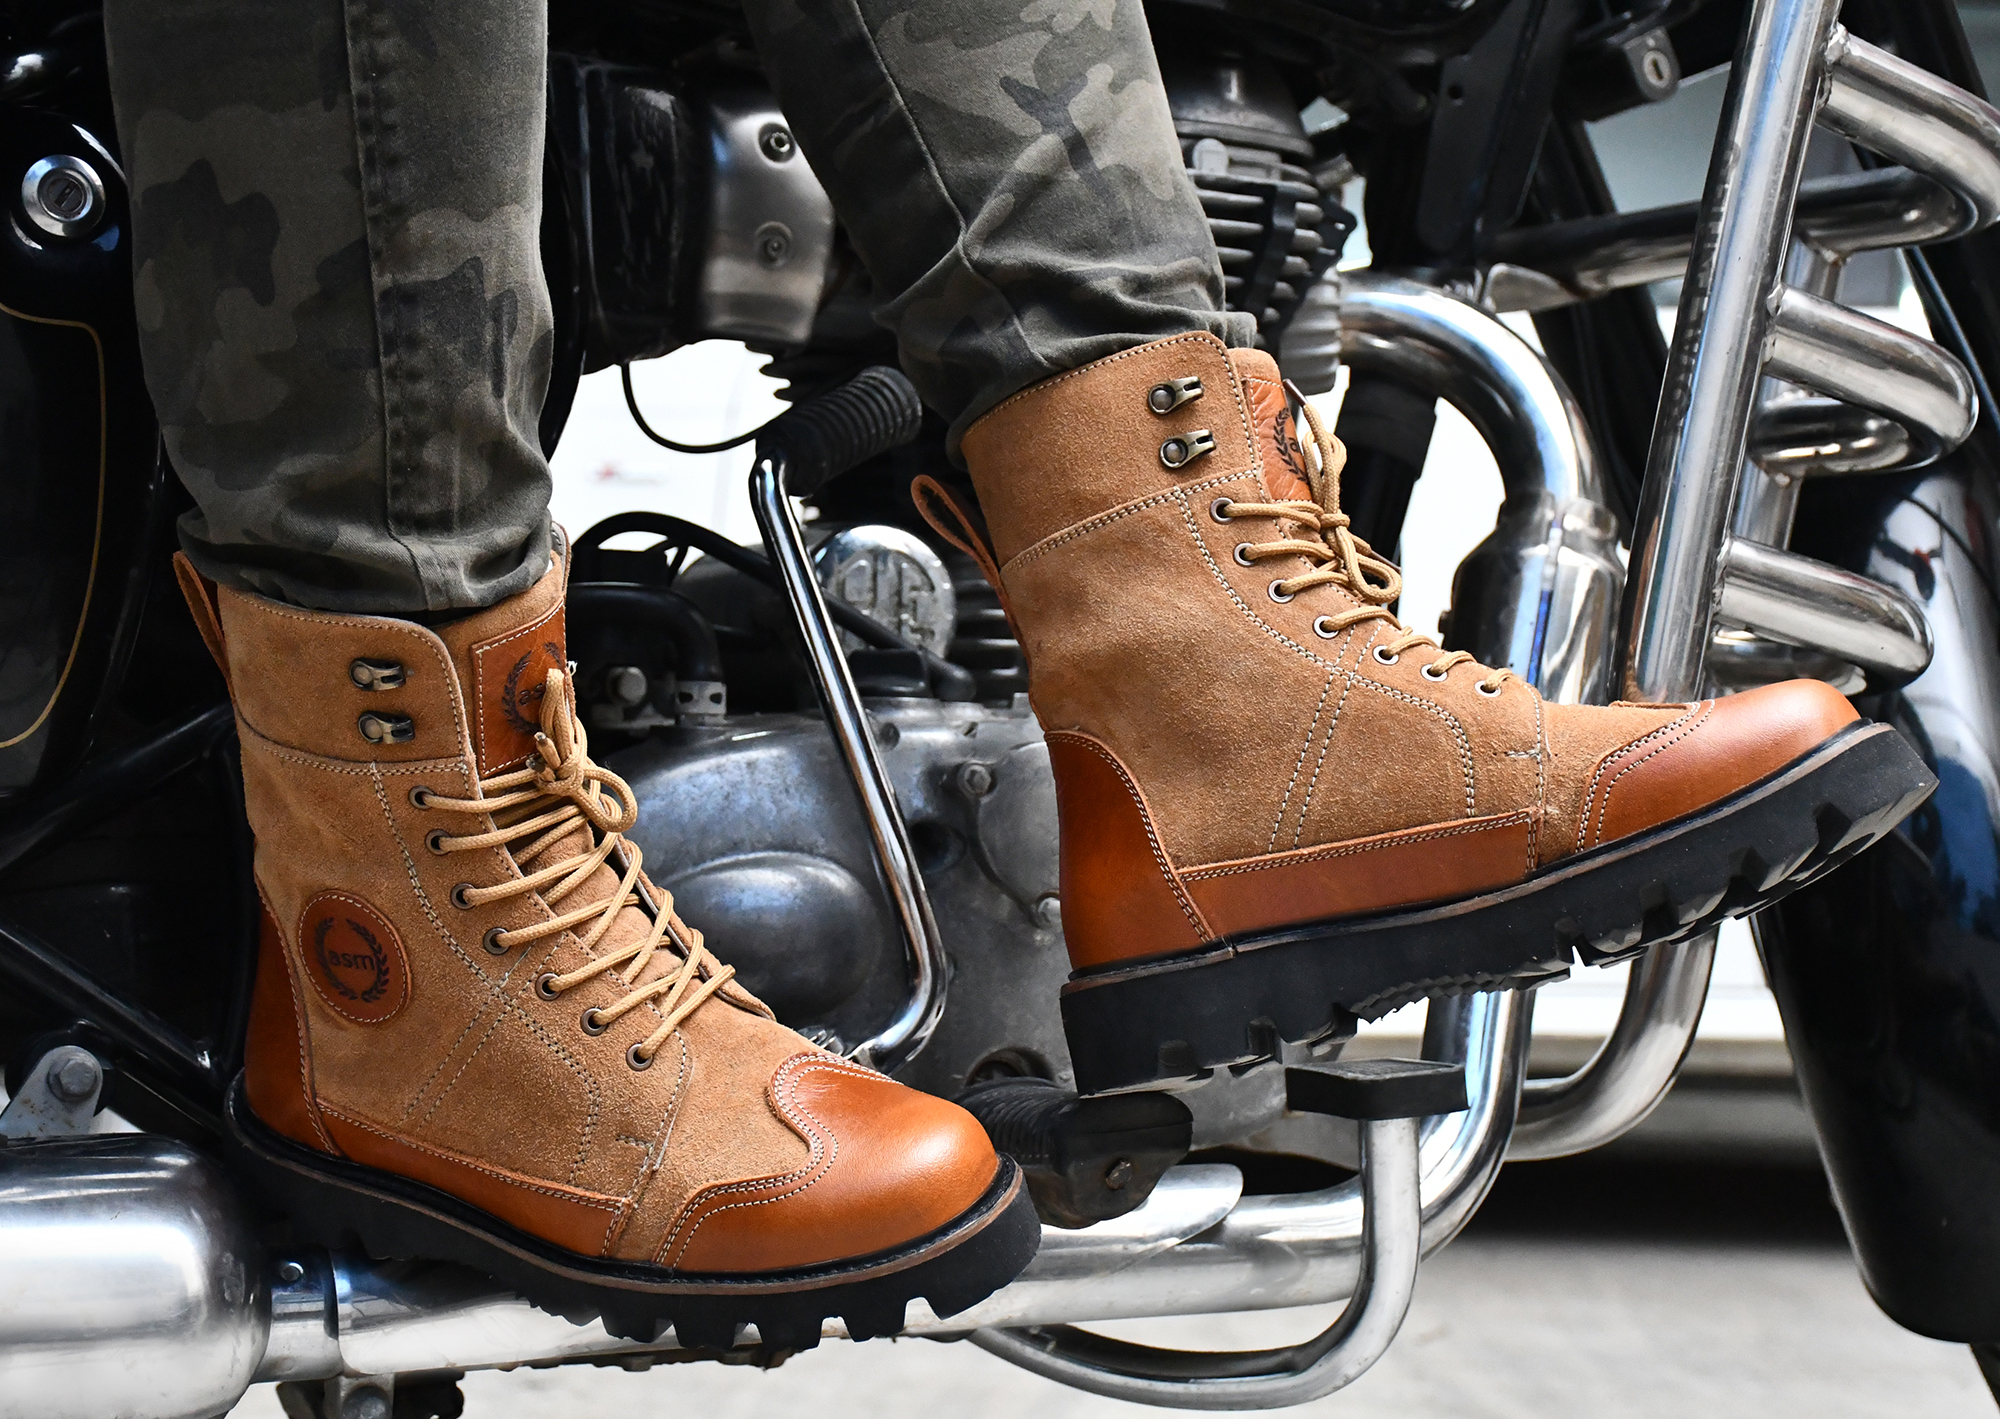 Biker Boots : Urban Rugged Tan & Suede leather boots for bikers with EVA Sole. Article : 702E-STan